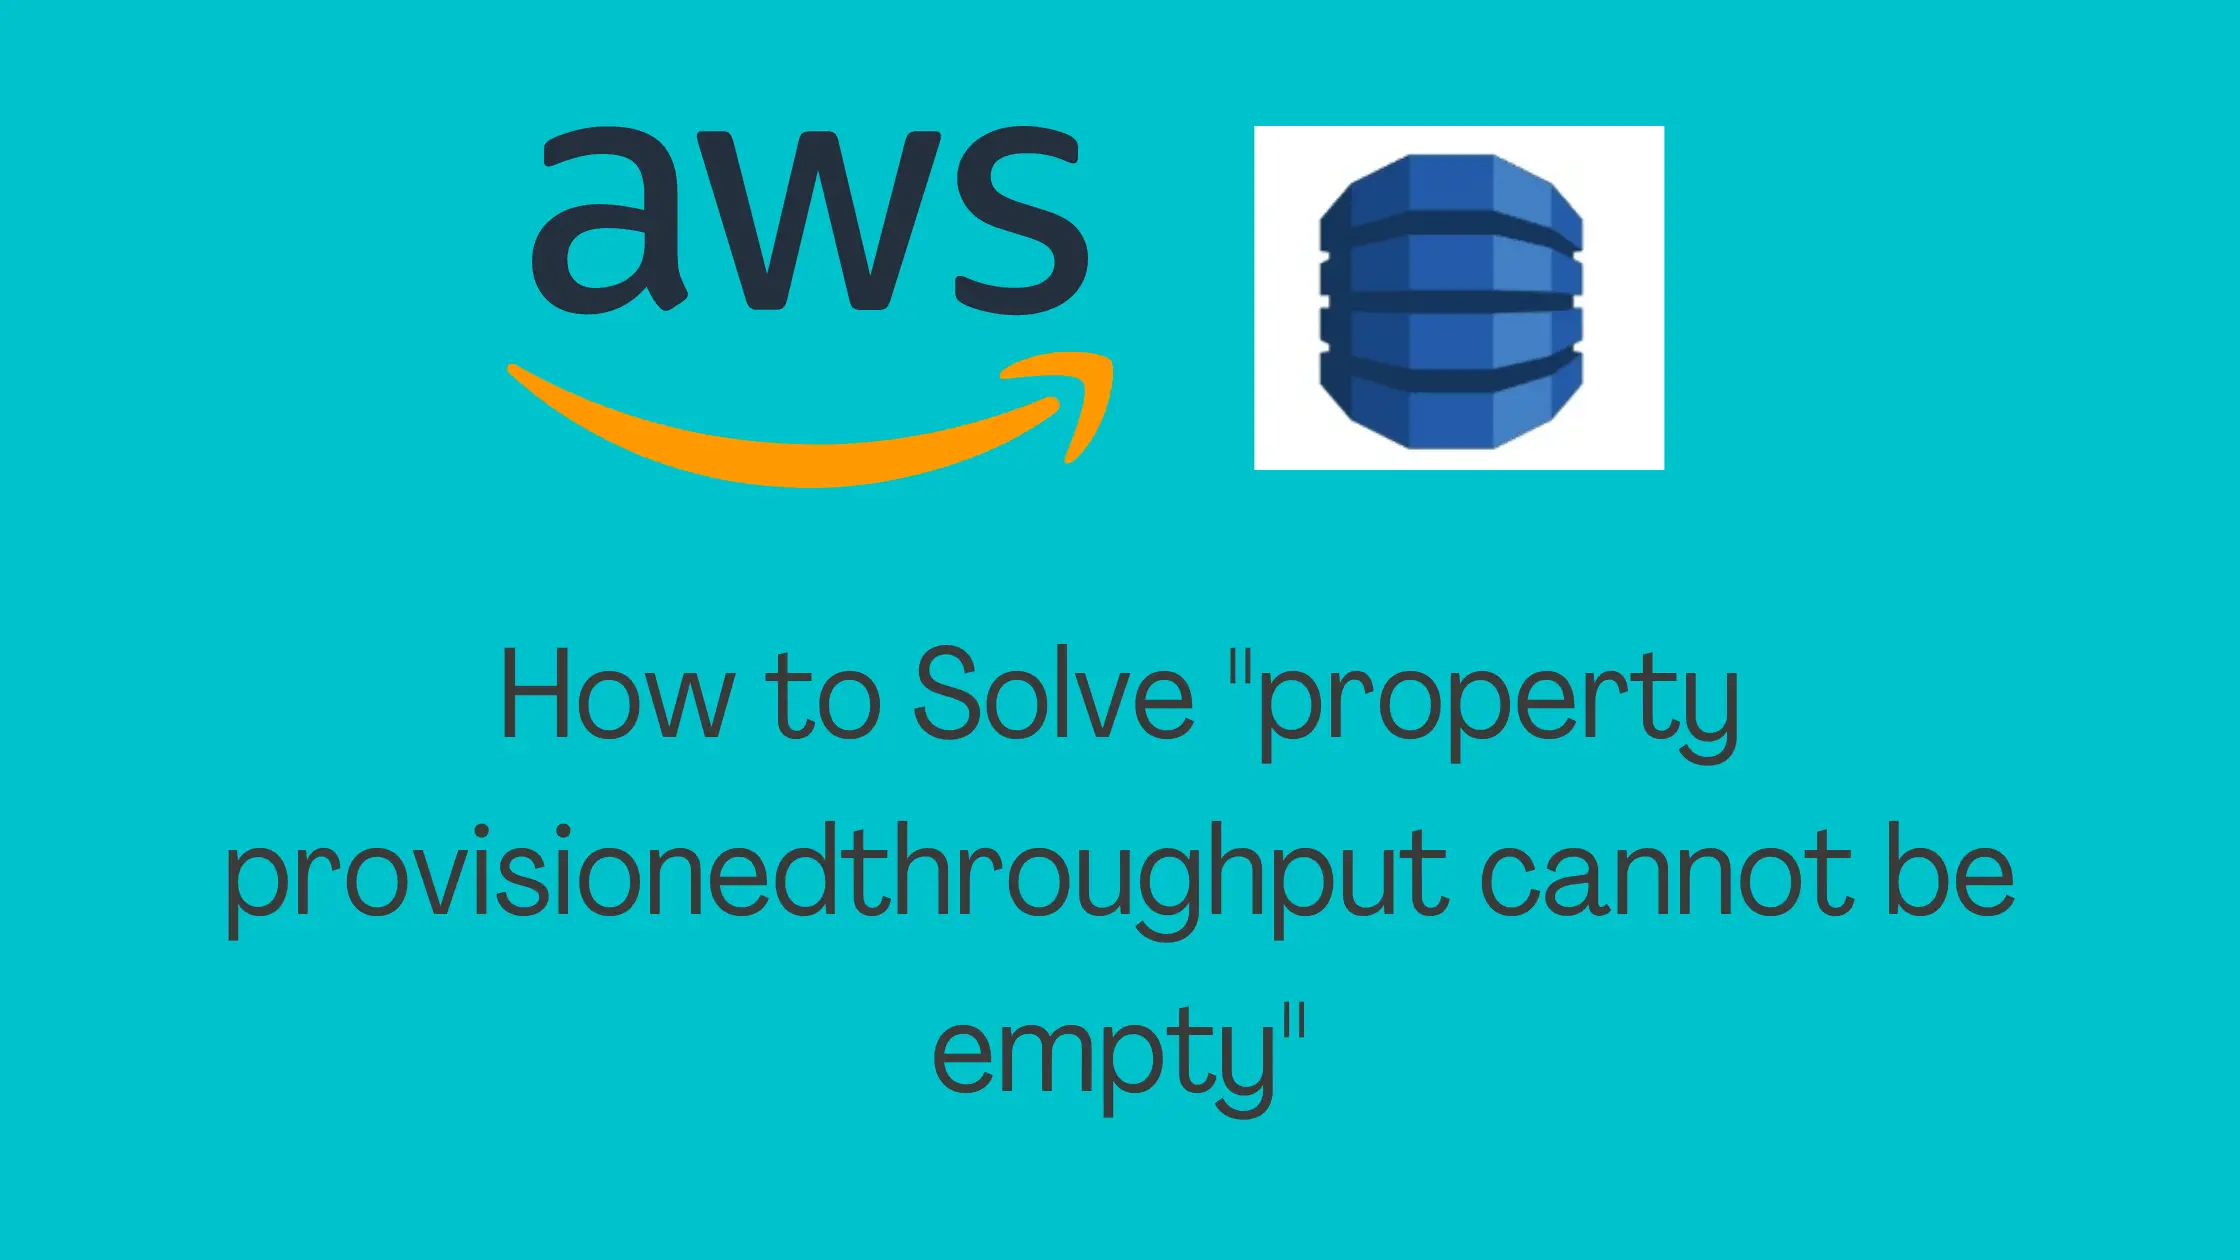 How to Solve "property provisionedthroughput cannot be empty"